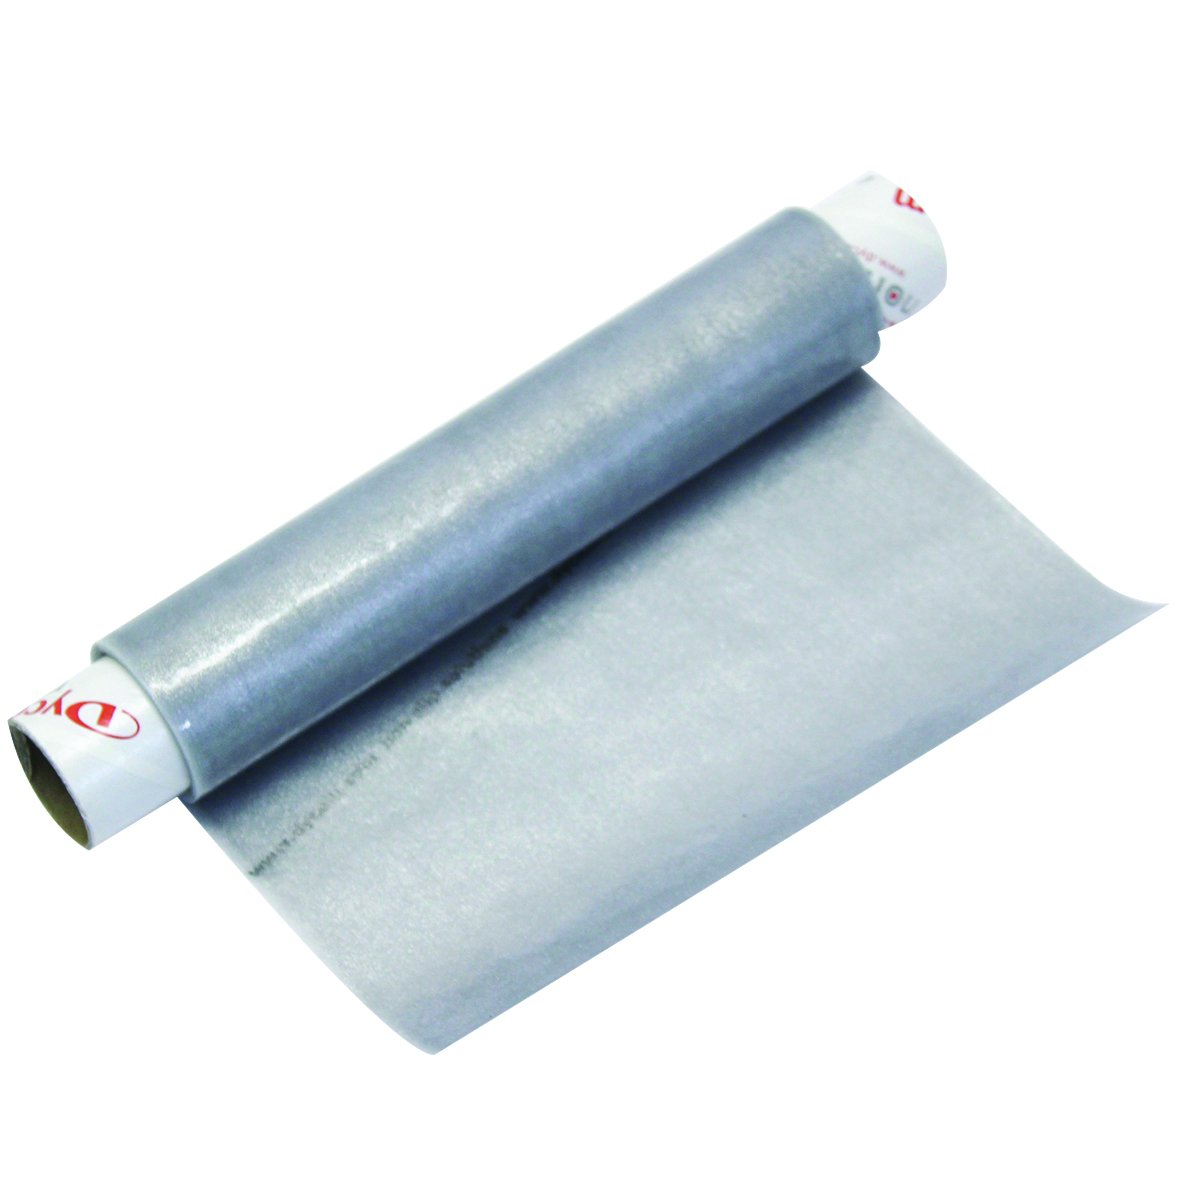 Silicone Roll Material